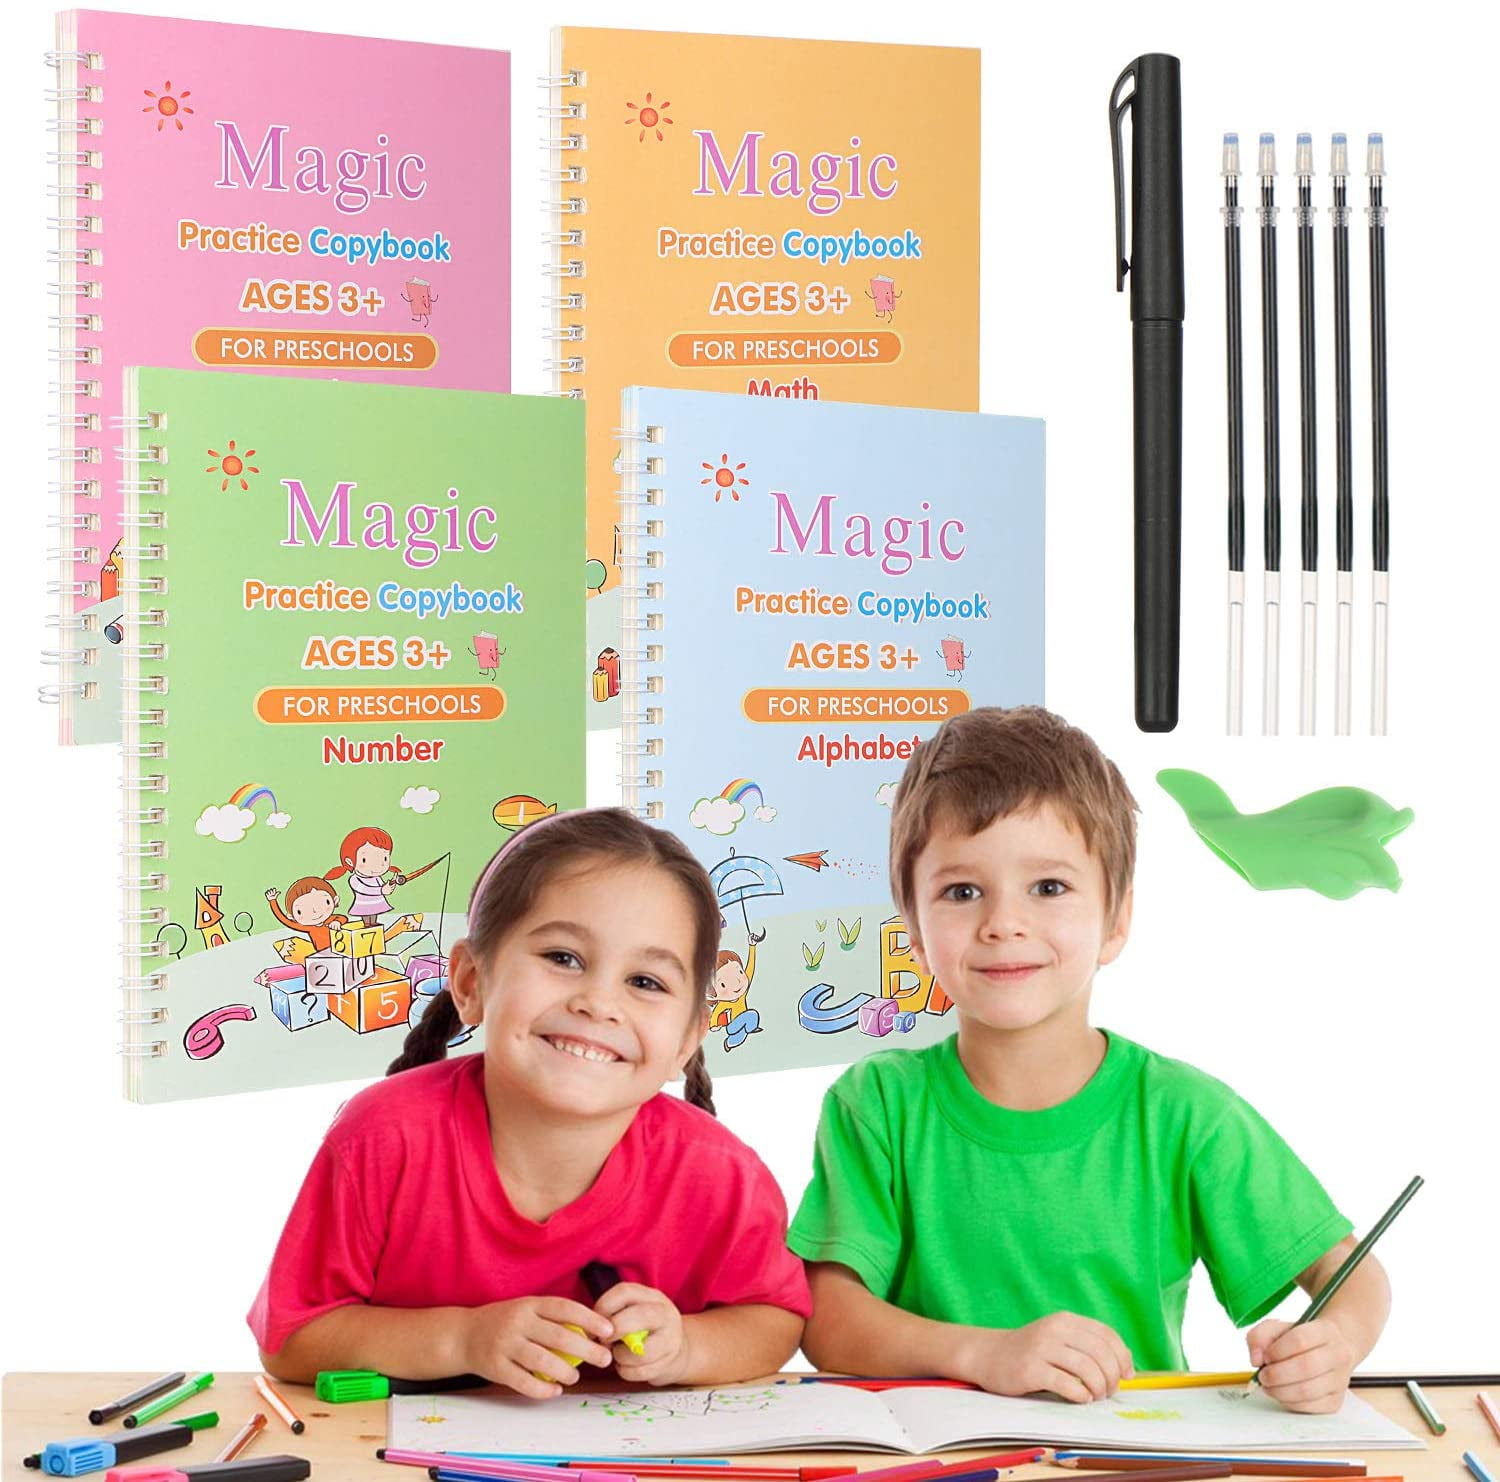 Magic Practice Copybook Set Handwritten With Disappearing Ink Pen Kids Learning 